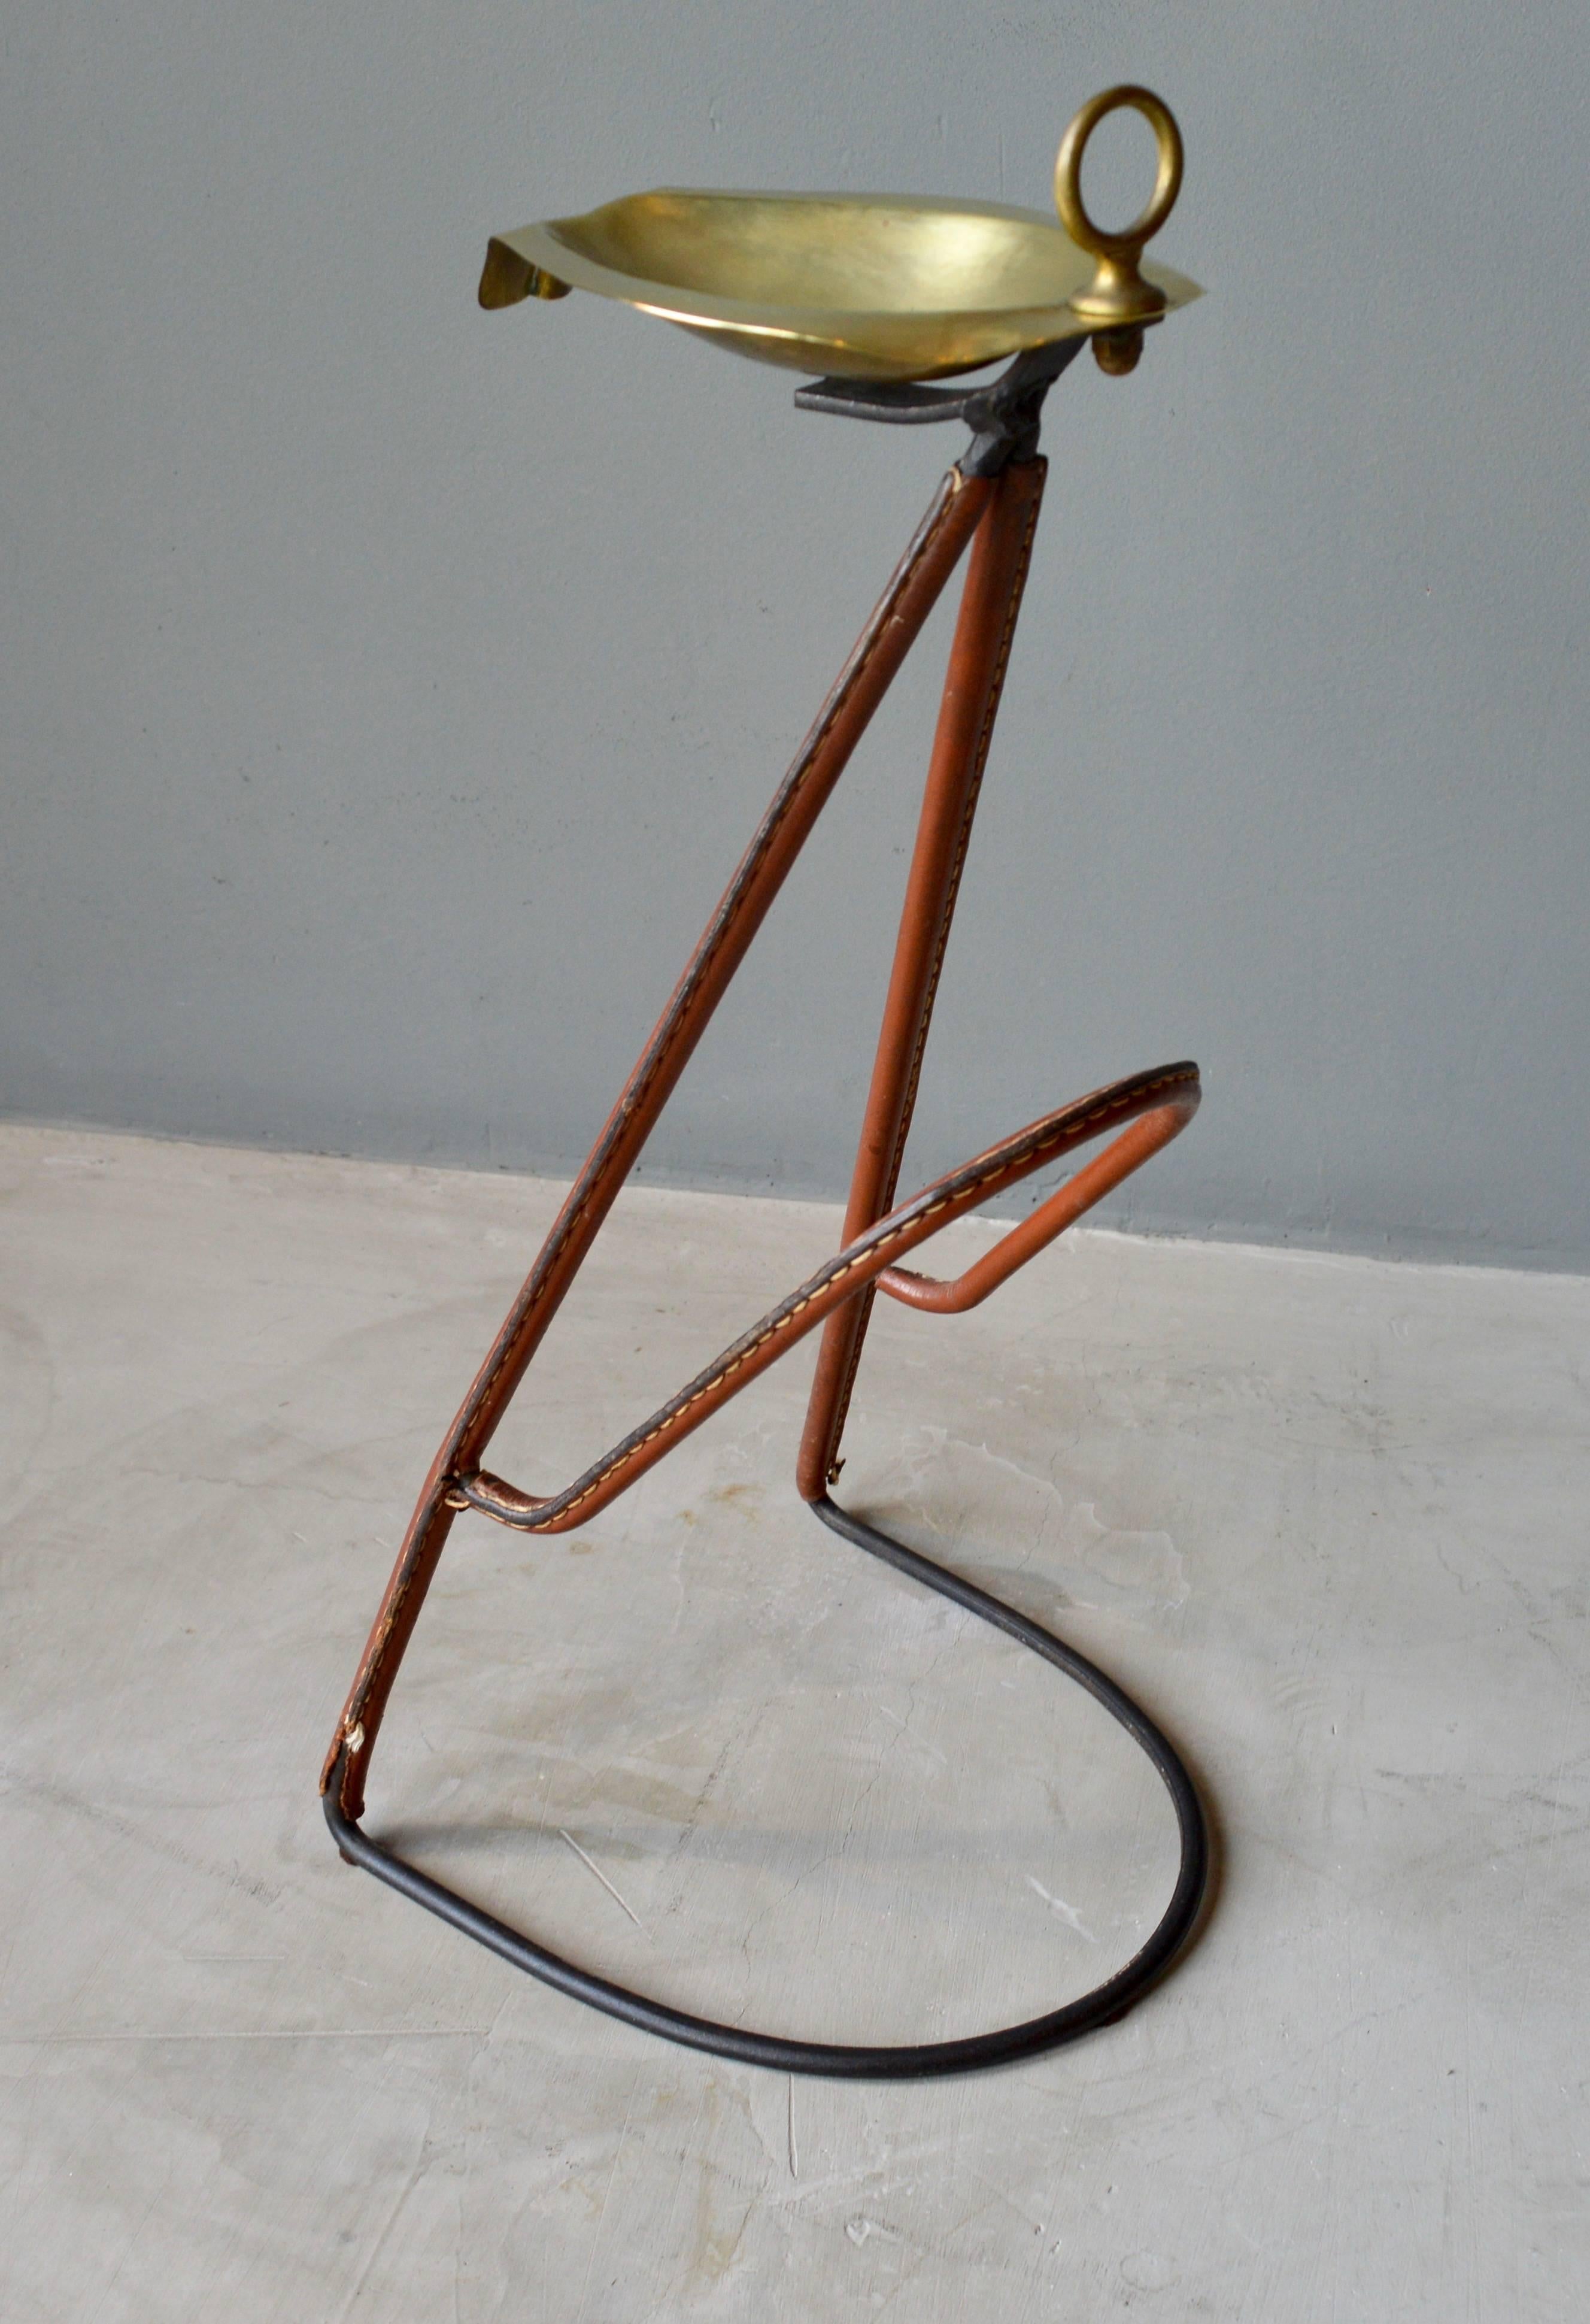 Unique iron and leather magazine rack / ashtray by Jacques Adnet. Iron base and frame with saddle leather wrapped throughout. Great patina to leather. Brass dish on top. Very unique Adnet piece.